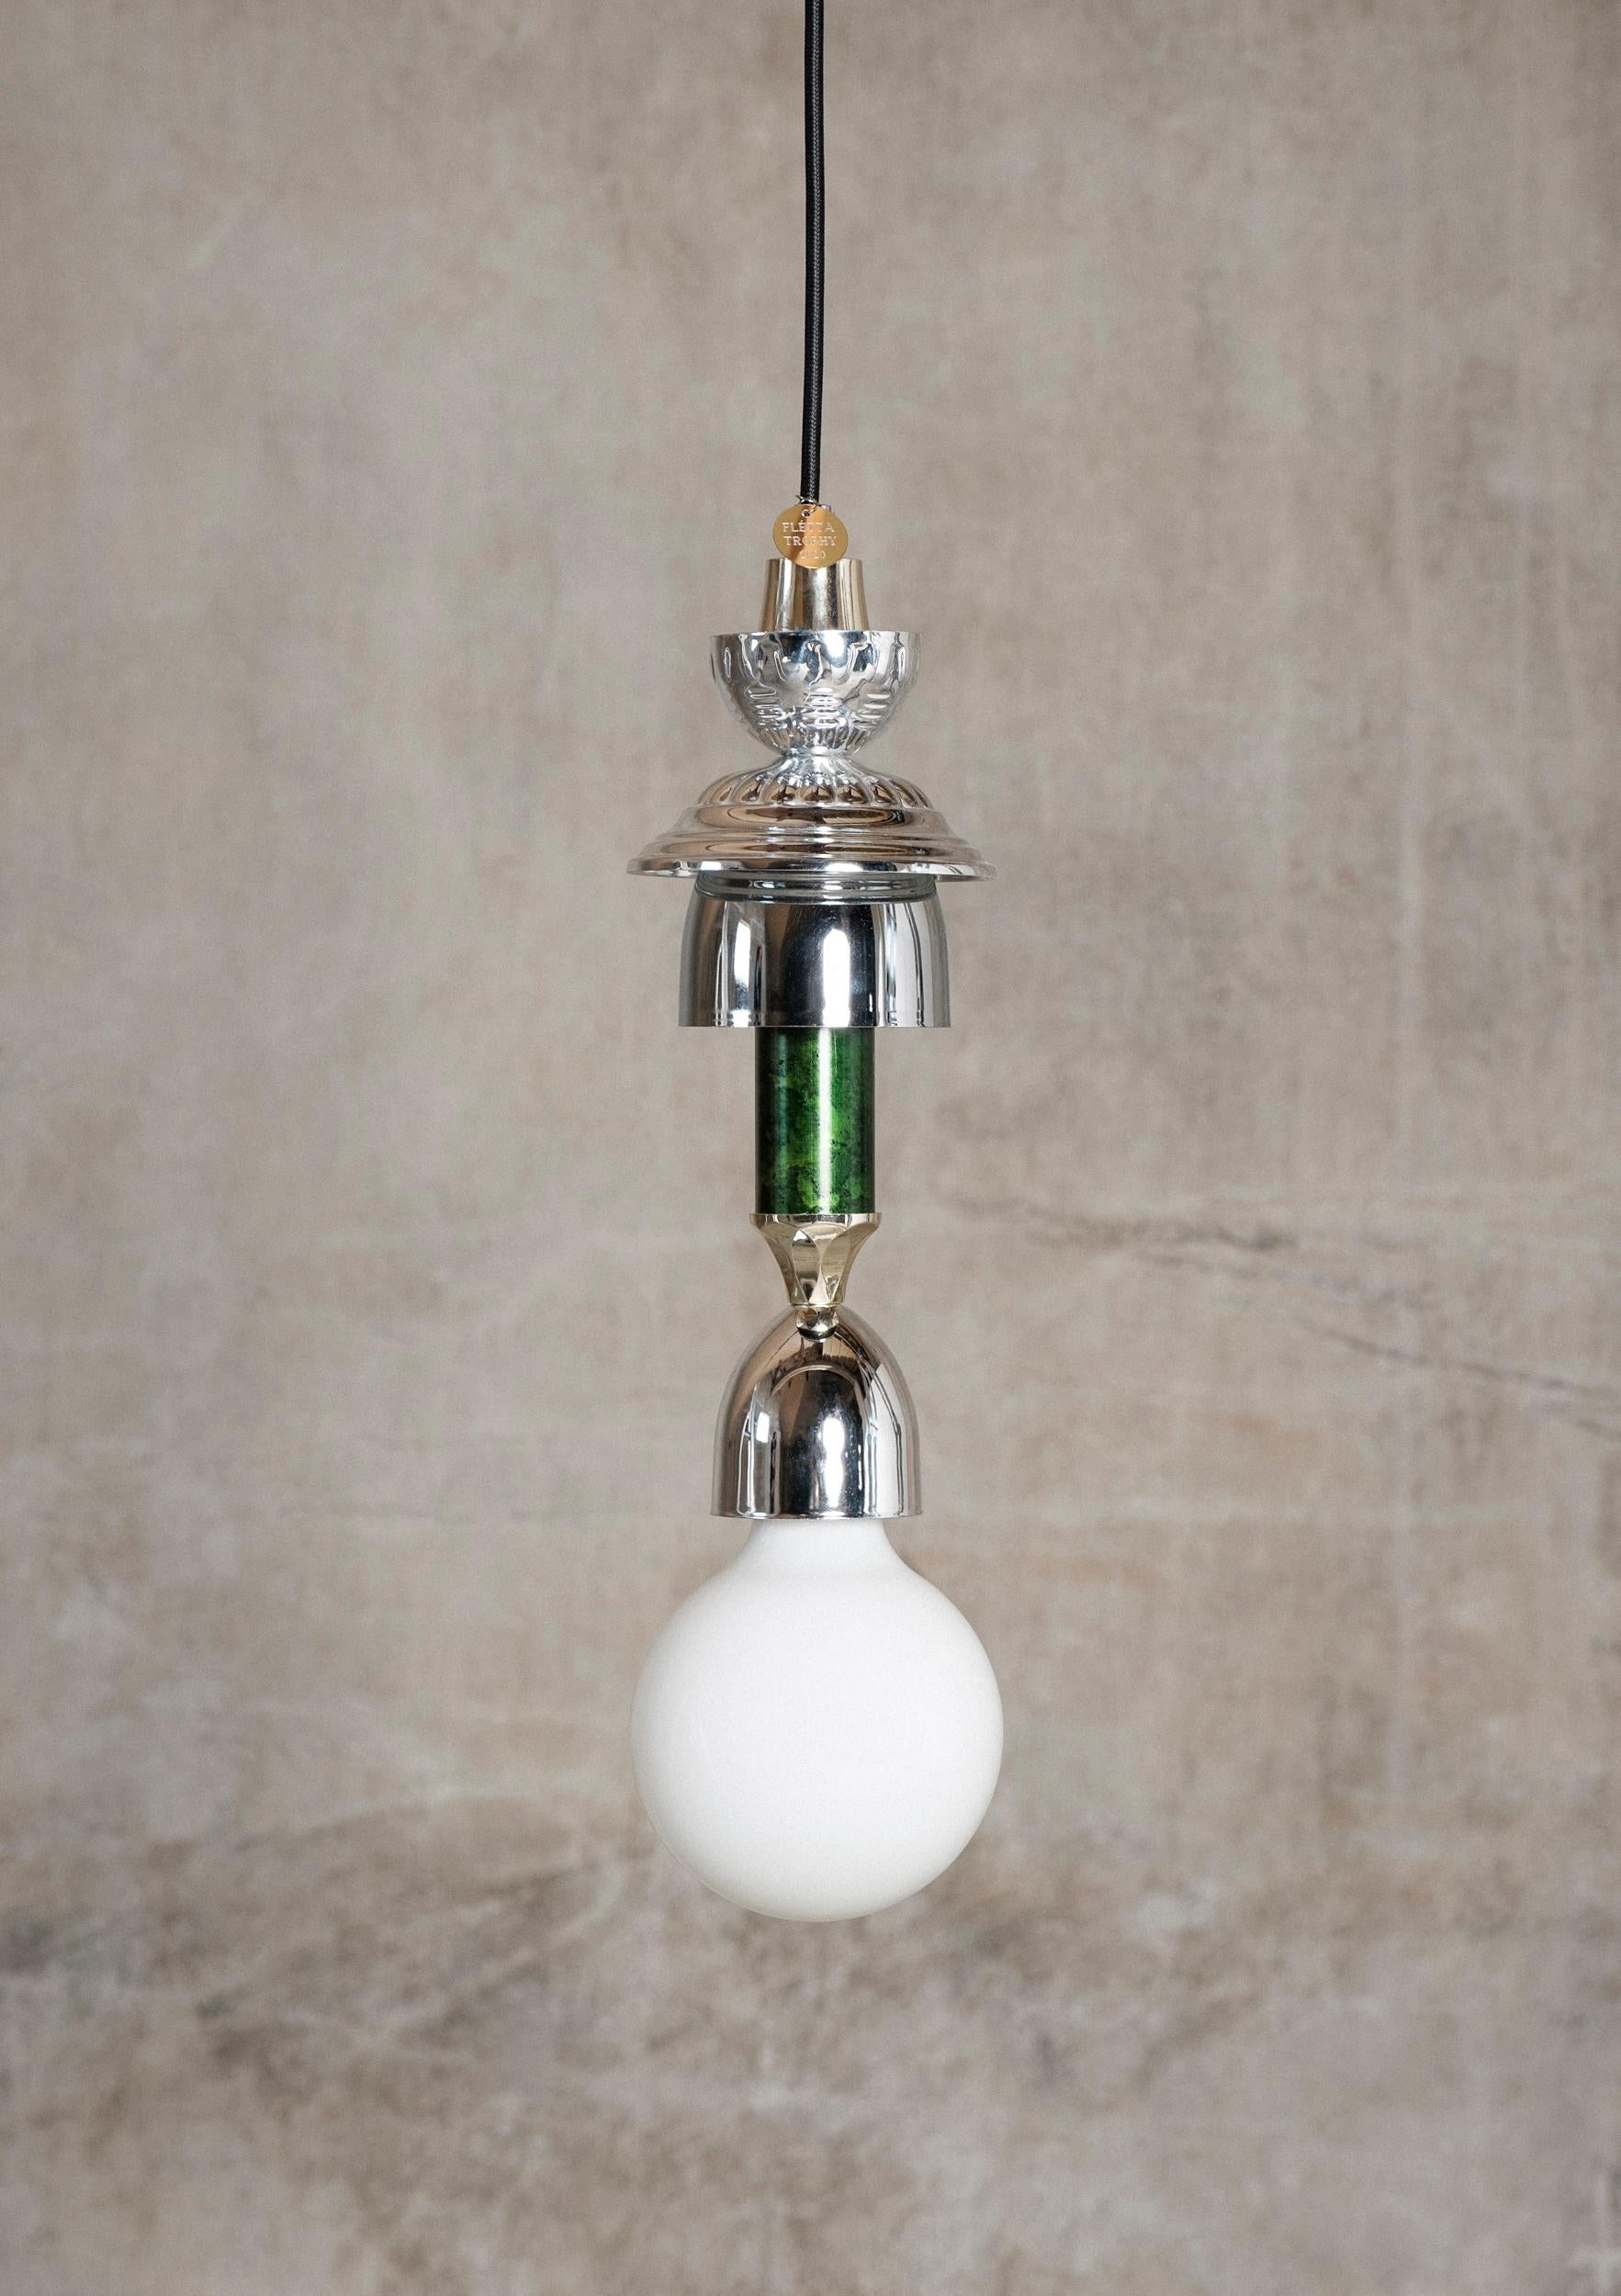 Silver, Green L3 Light by Flétta
Dimensions: 34 x 4 cm
Materials: silver

Trophy is a collection of tables, lights, flowerpots and shelves made of old trophies collected from athletes and sports clubs in Iceland. Trophies are a part of big